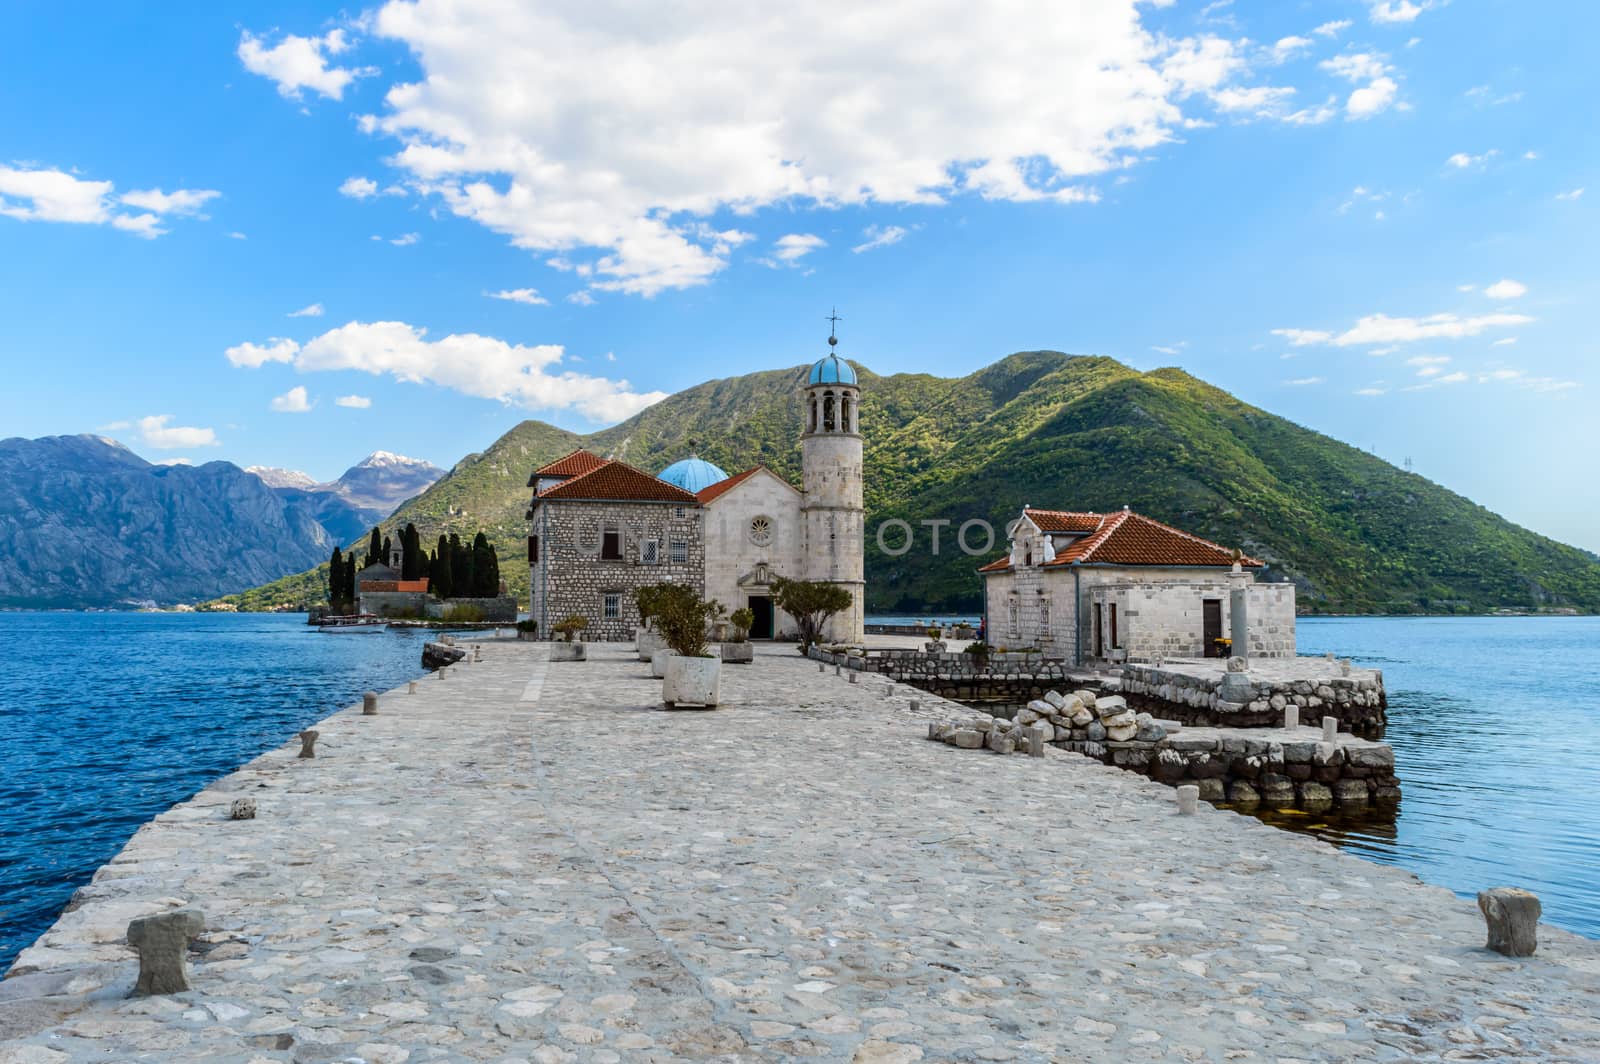 Church of Our Lady of the Rocks, Perast, Montenegro  by radzonimo